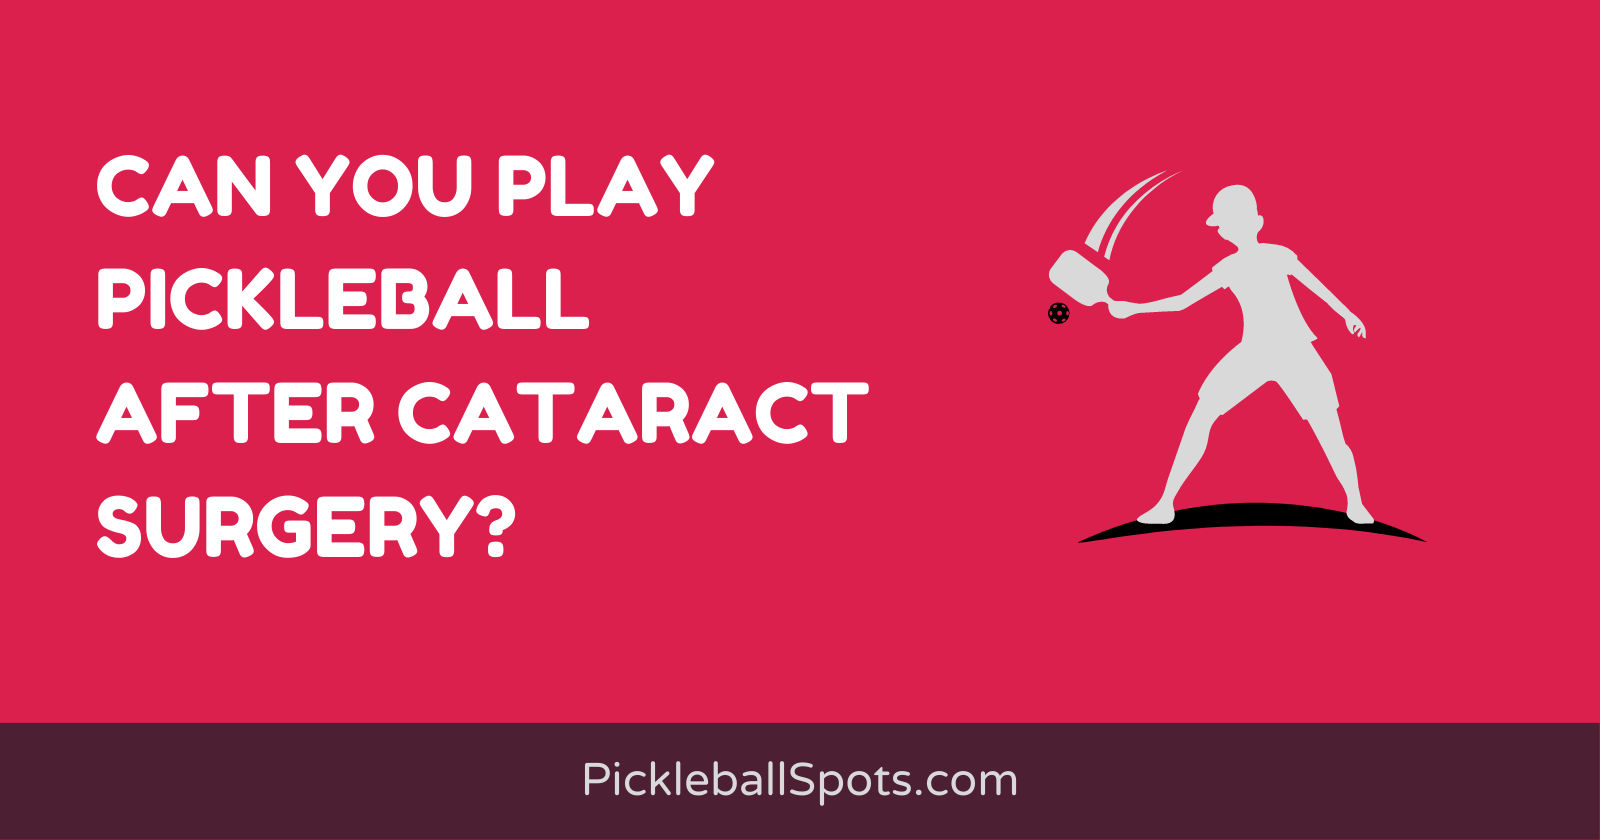 Can You Play Pickleball After Cataract Surgery